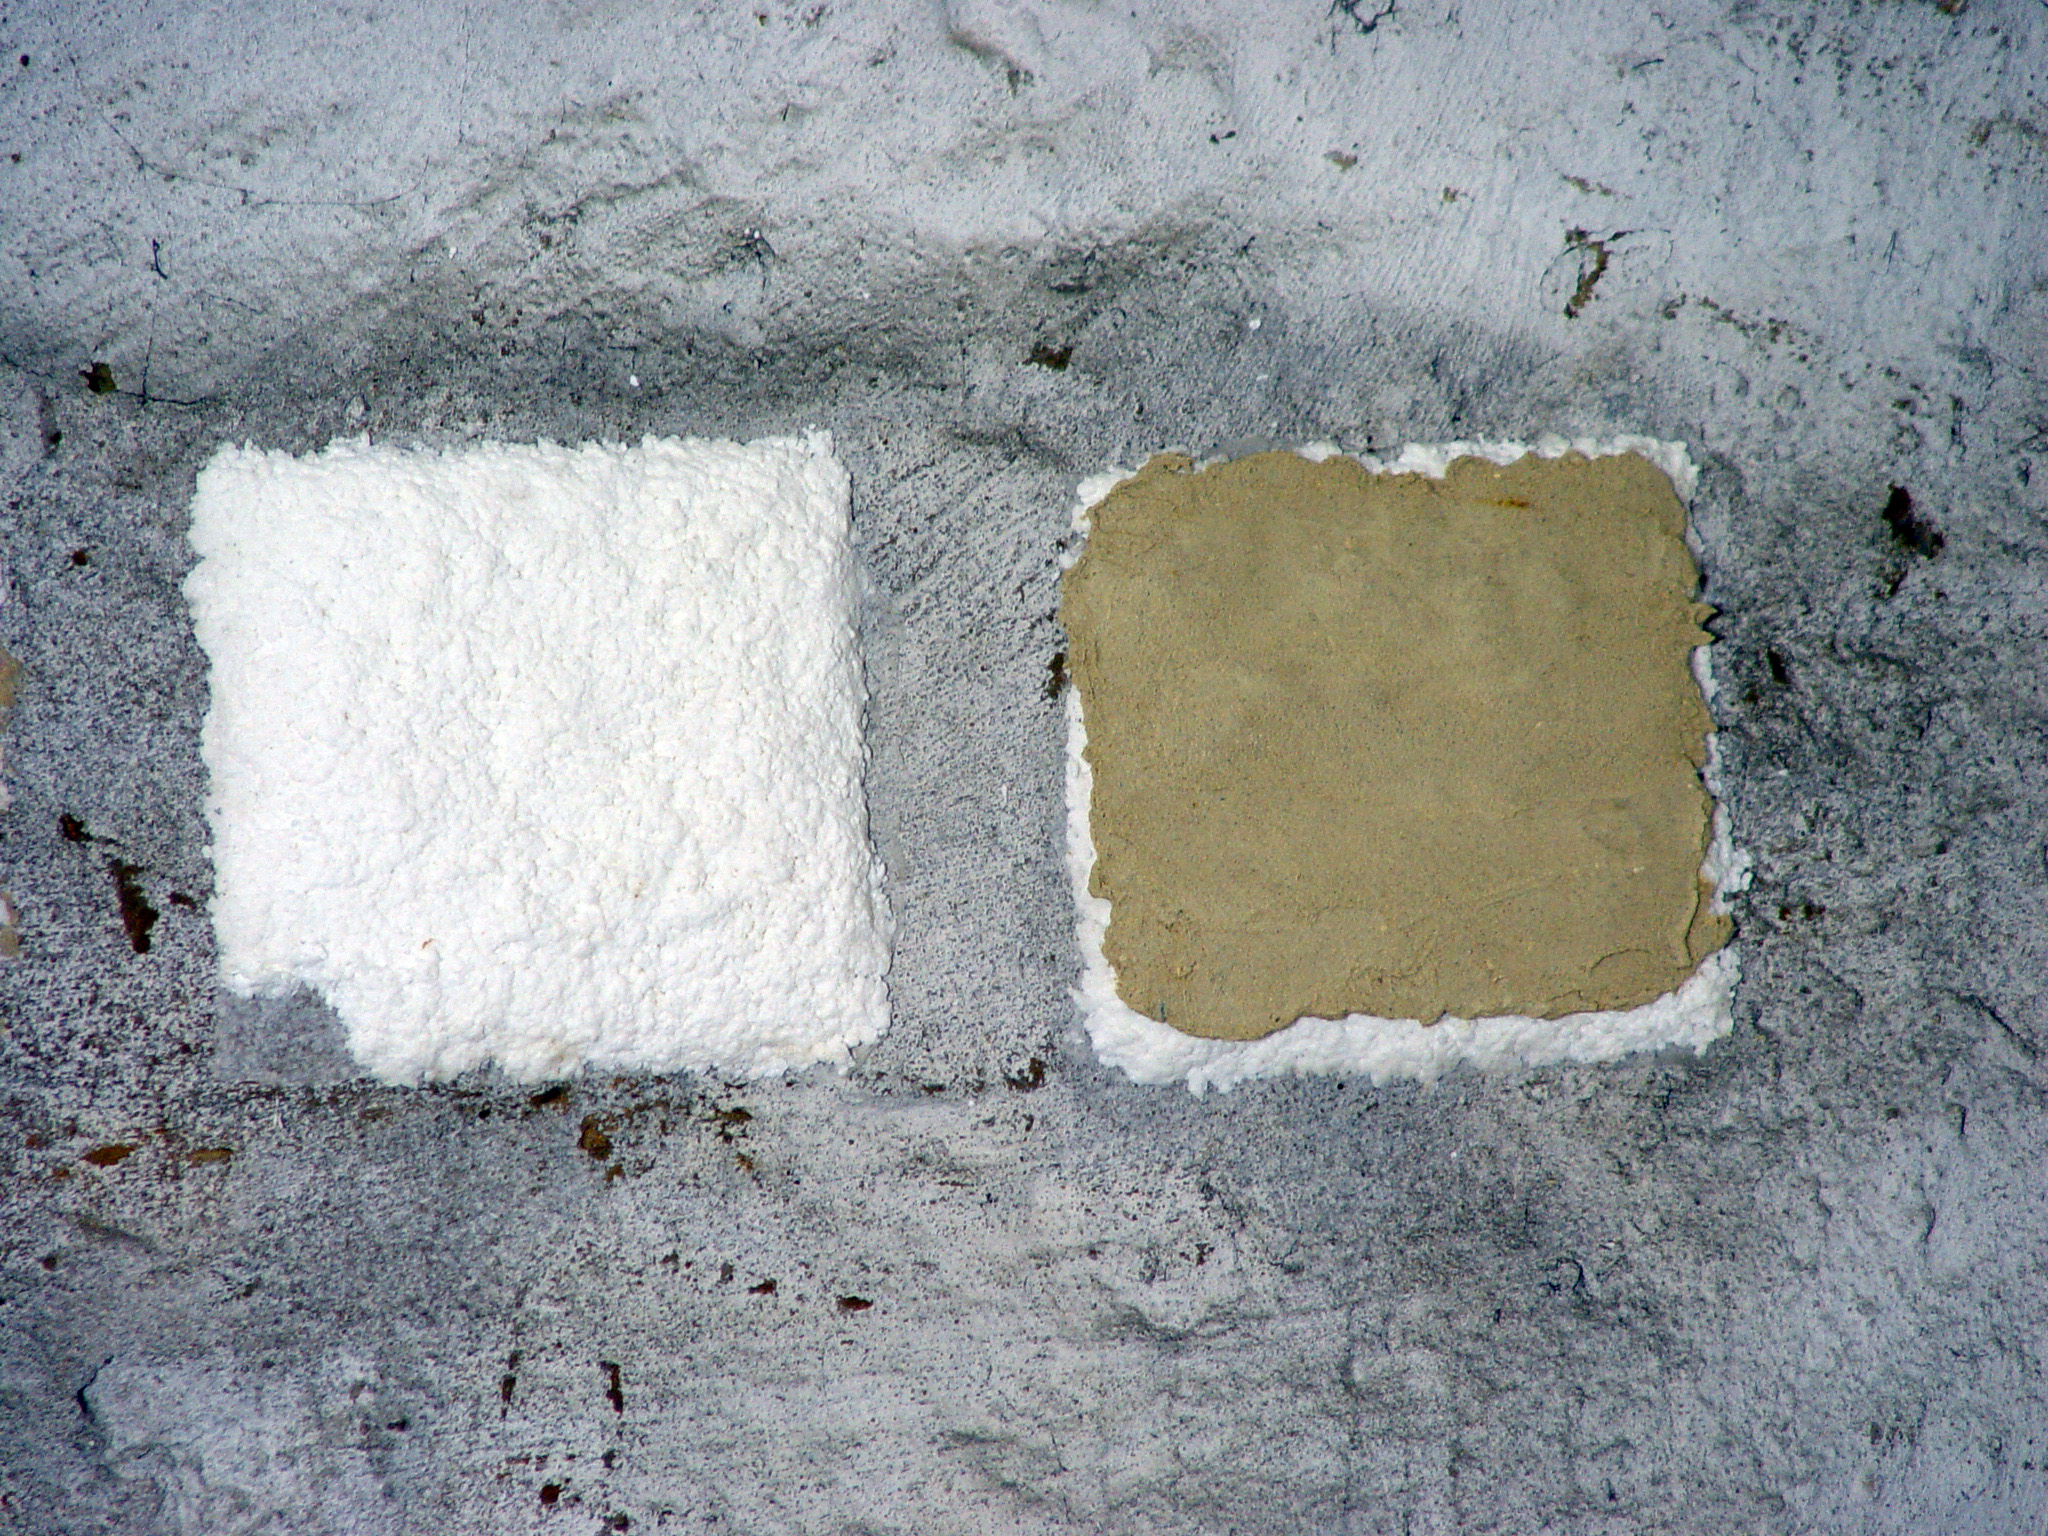 figure 1: Poultices with and without plaster covering